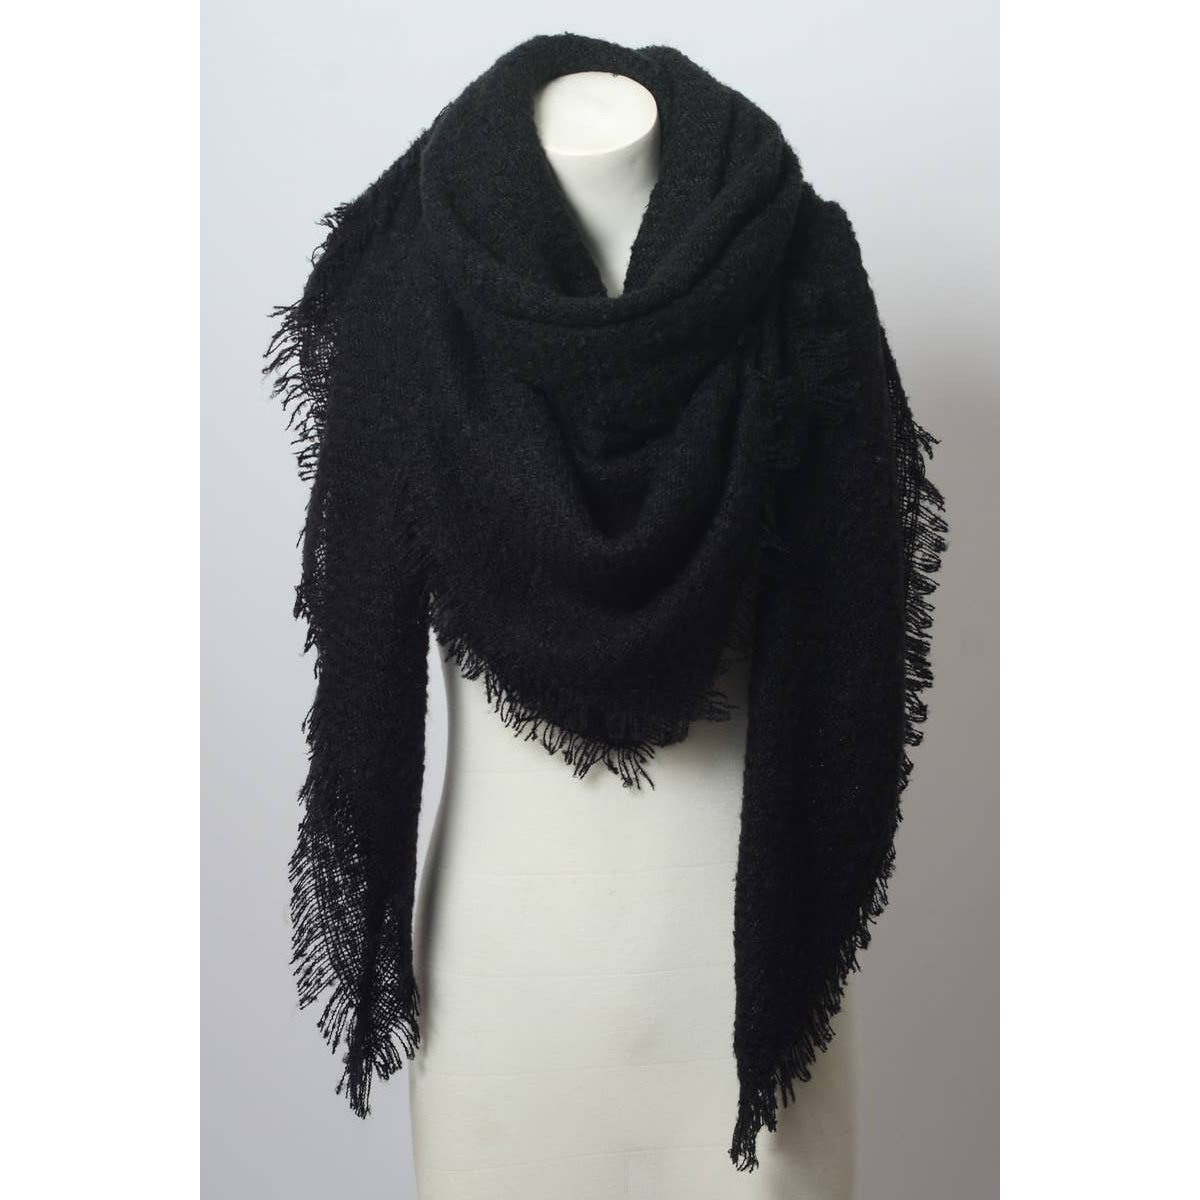 Le Collection Solid Marl Woven Blanket Scarf Black Accessories Scarves And Wraps At Dragonfly